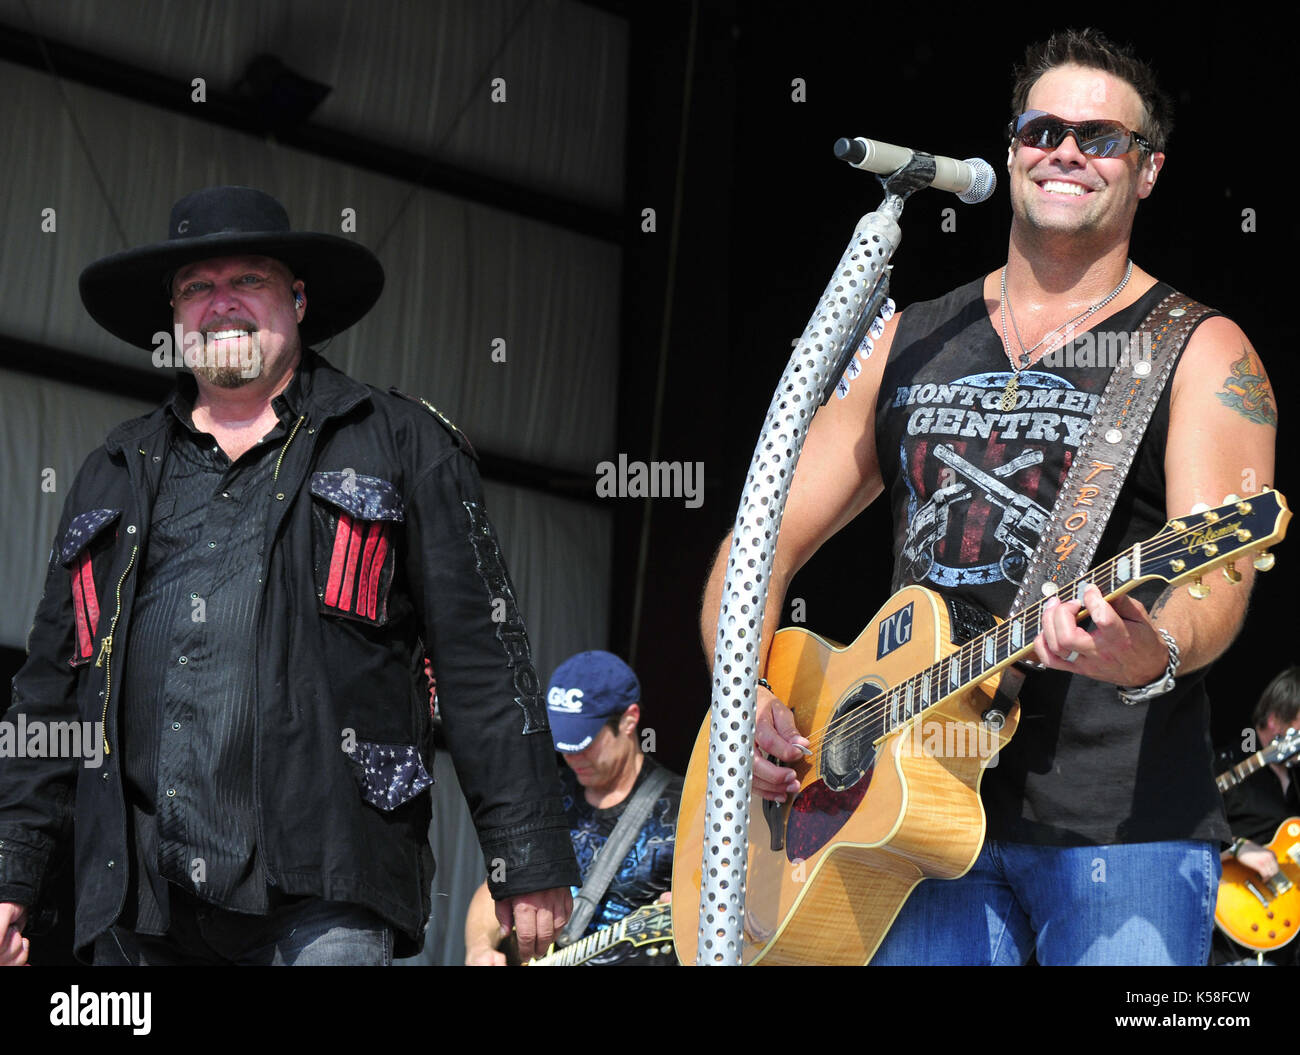 Morristown, Ohio, USA. 17th July, 2011. 08 August 2017 - Troy Gentry of the country duo Montgomery Gentry, died in a helicopter crash in Medford, New Jersey where he was scheduled to perform. With his performing partner Eddie Montgomery, Gentry enjoyed a series of country hits throughout the 2000s, including five Number Ones. He was 50 years old. File Photo: 17 July 2011 - Morristown, Ohio - Eddie Montgomery and Troy Gentry of Montgomery Gentry perform at ''Jamboree In The Hills 2011'' also known as the ''Super Bowl of Country Music.'' Photo Credit: Kelly Blecher/AdMedia (Credit Image: © Kell Stock Photo